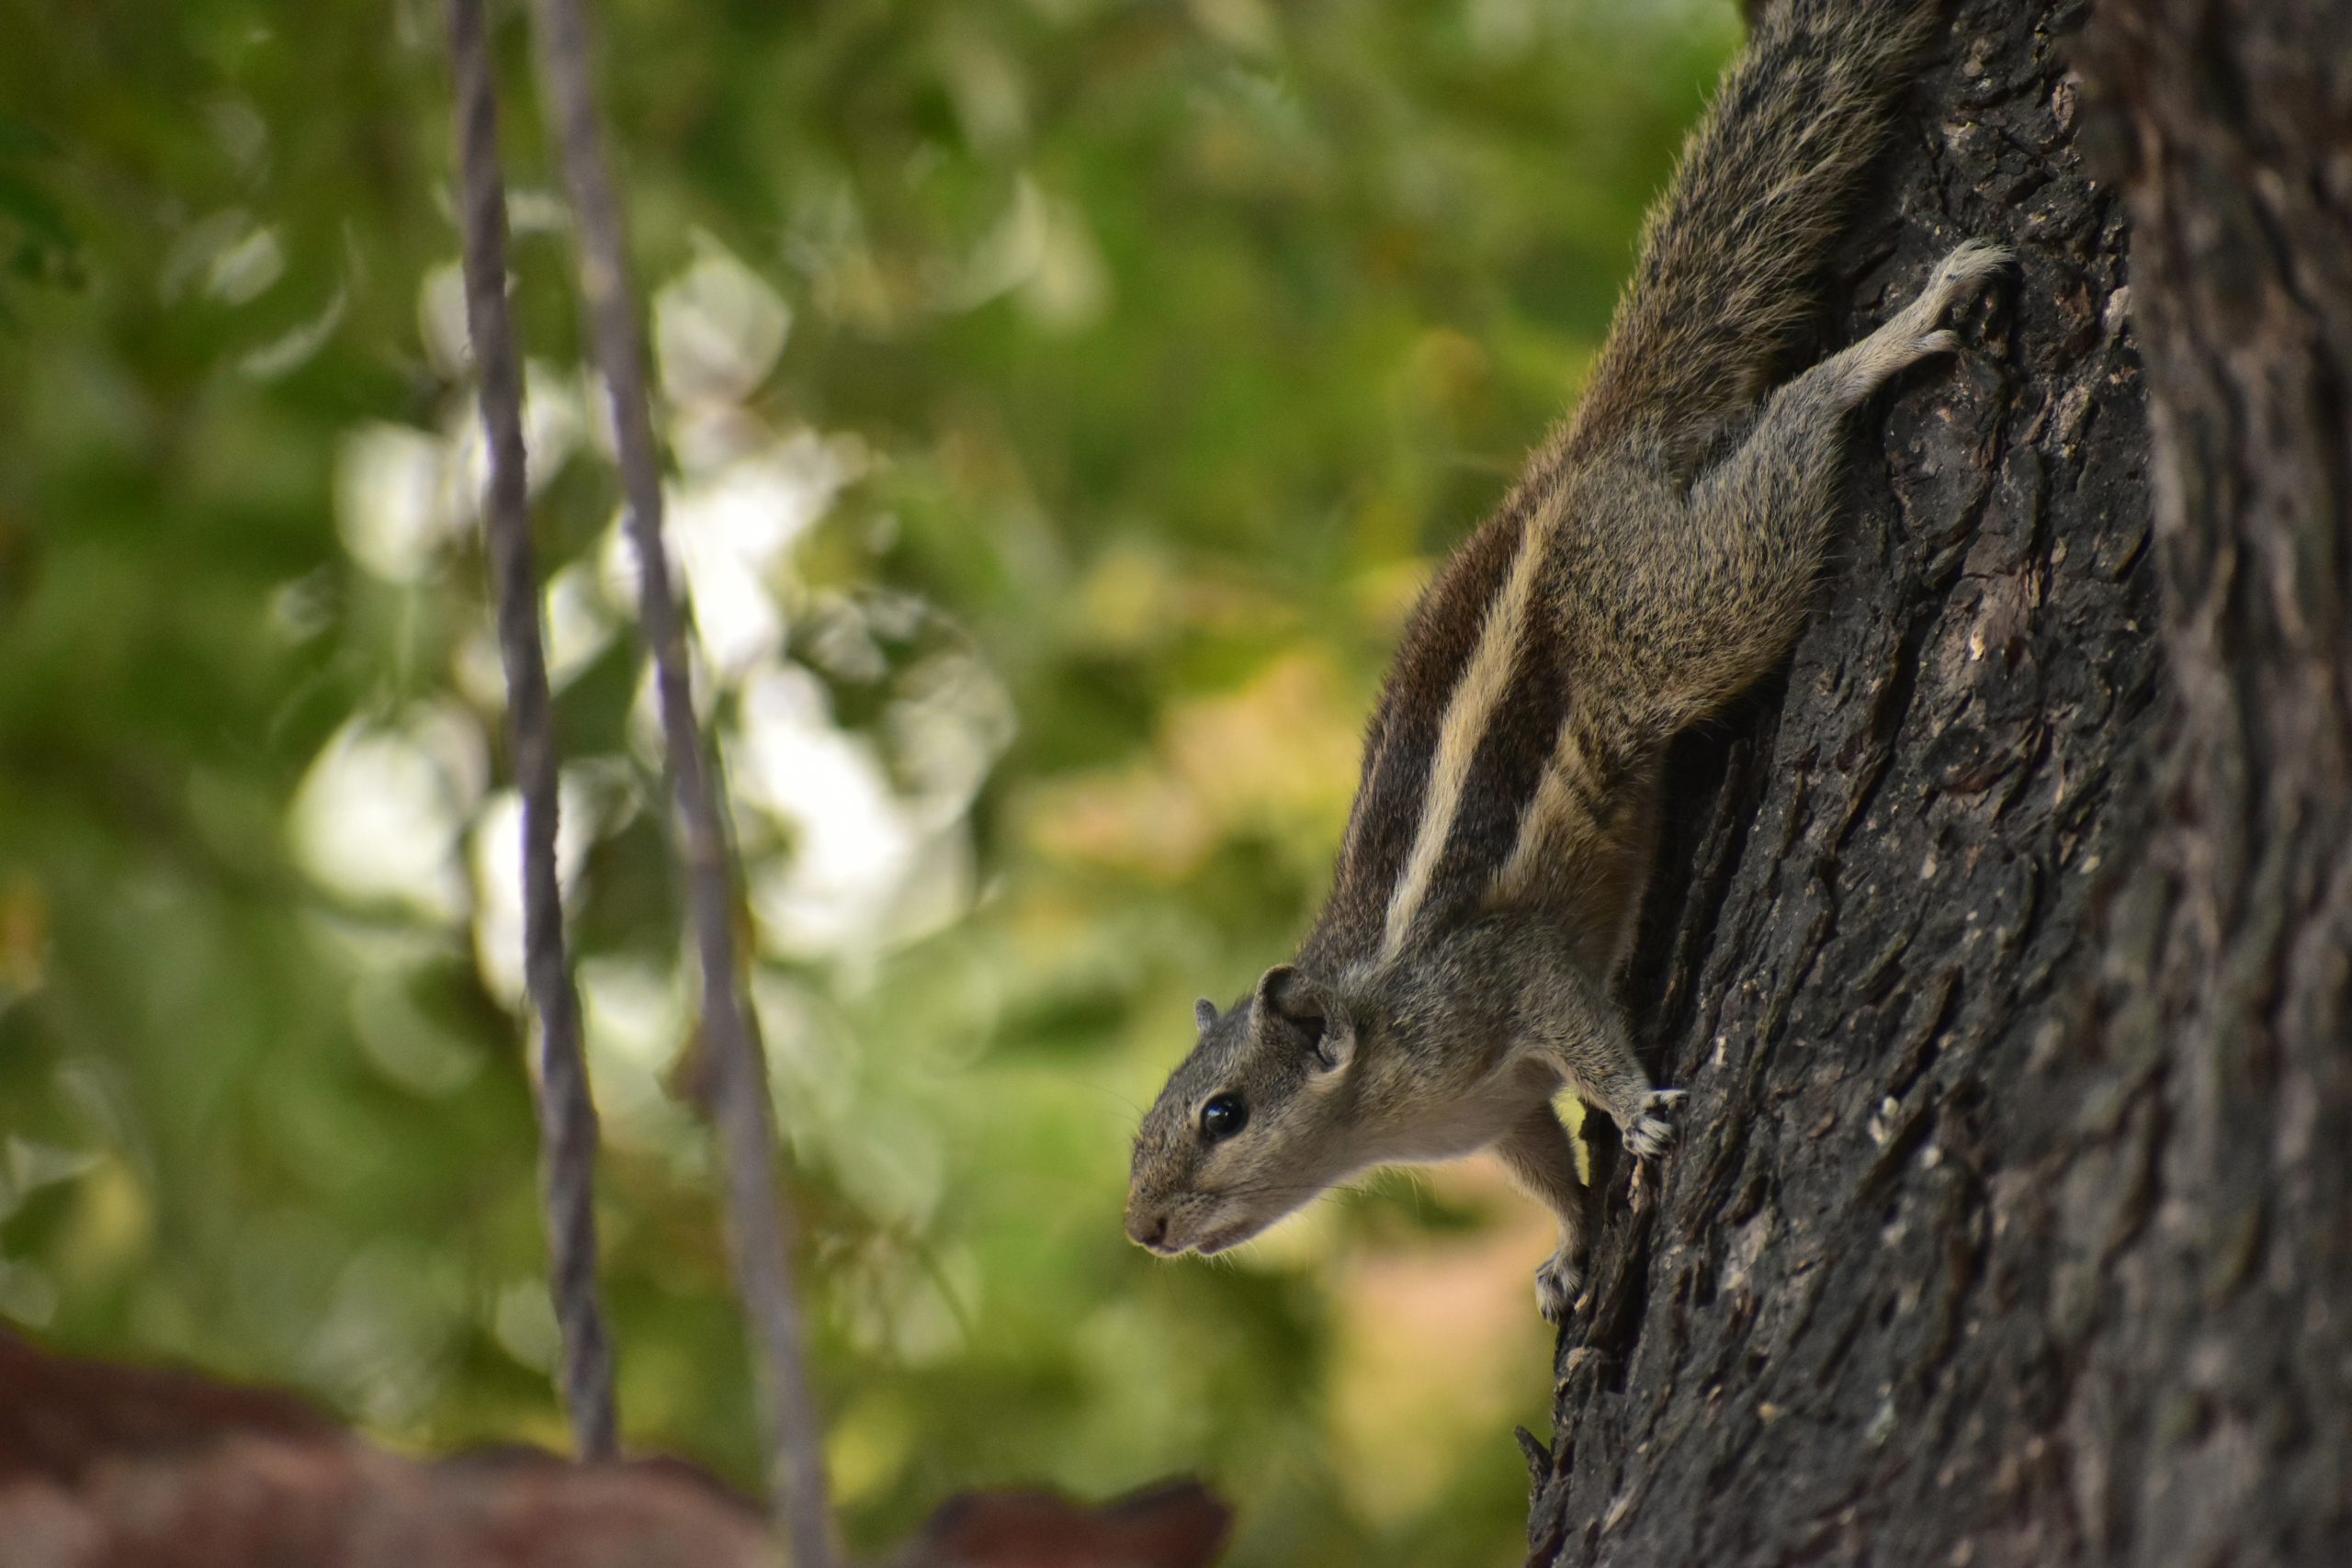 A squirrel on a tree